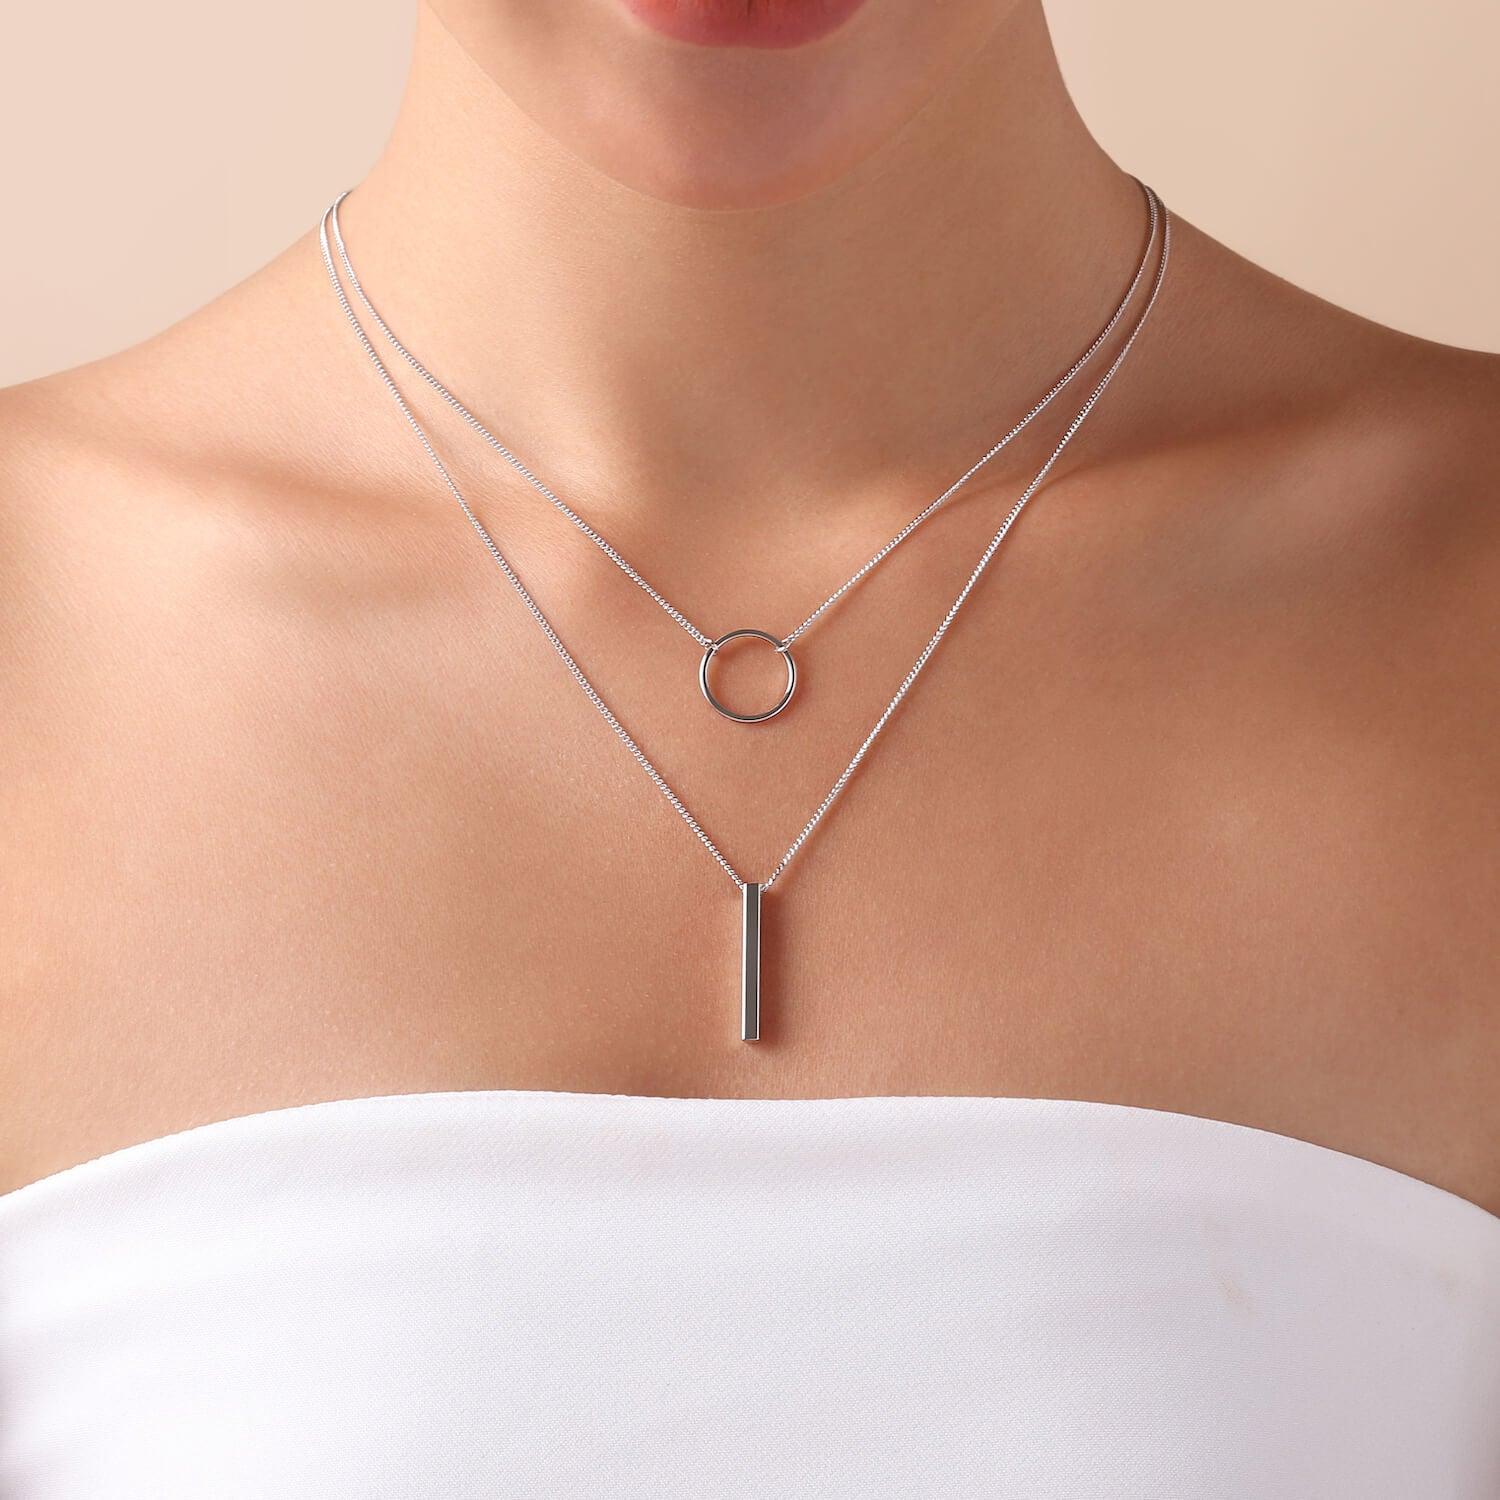 Silver Plated Double Necklace with Circle and Rod